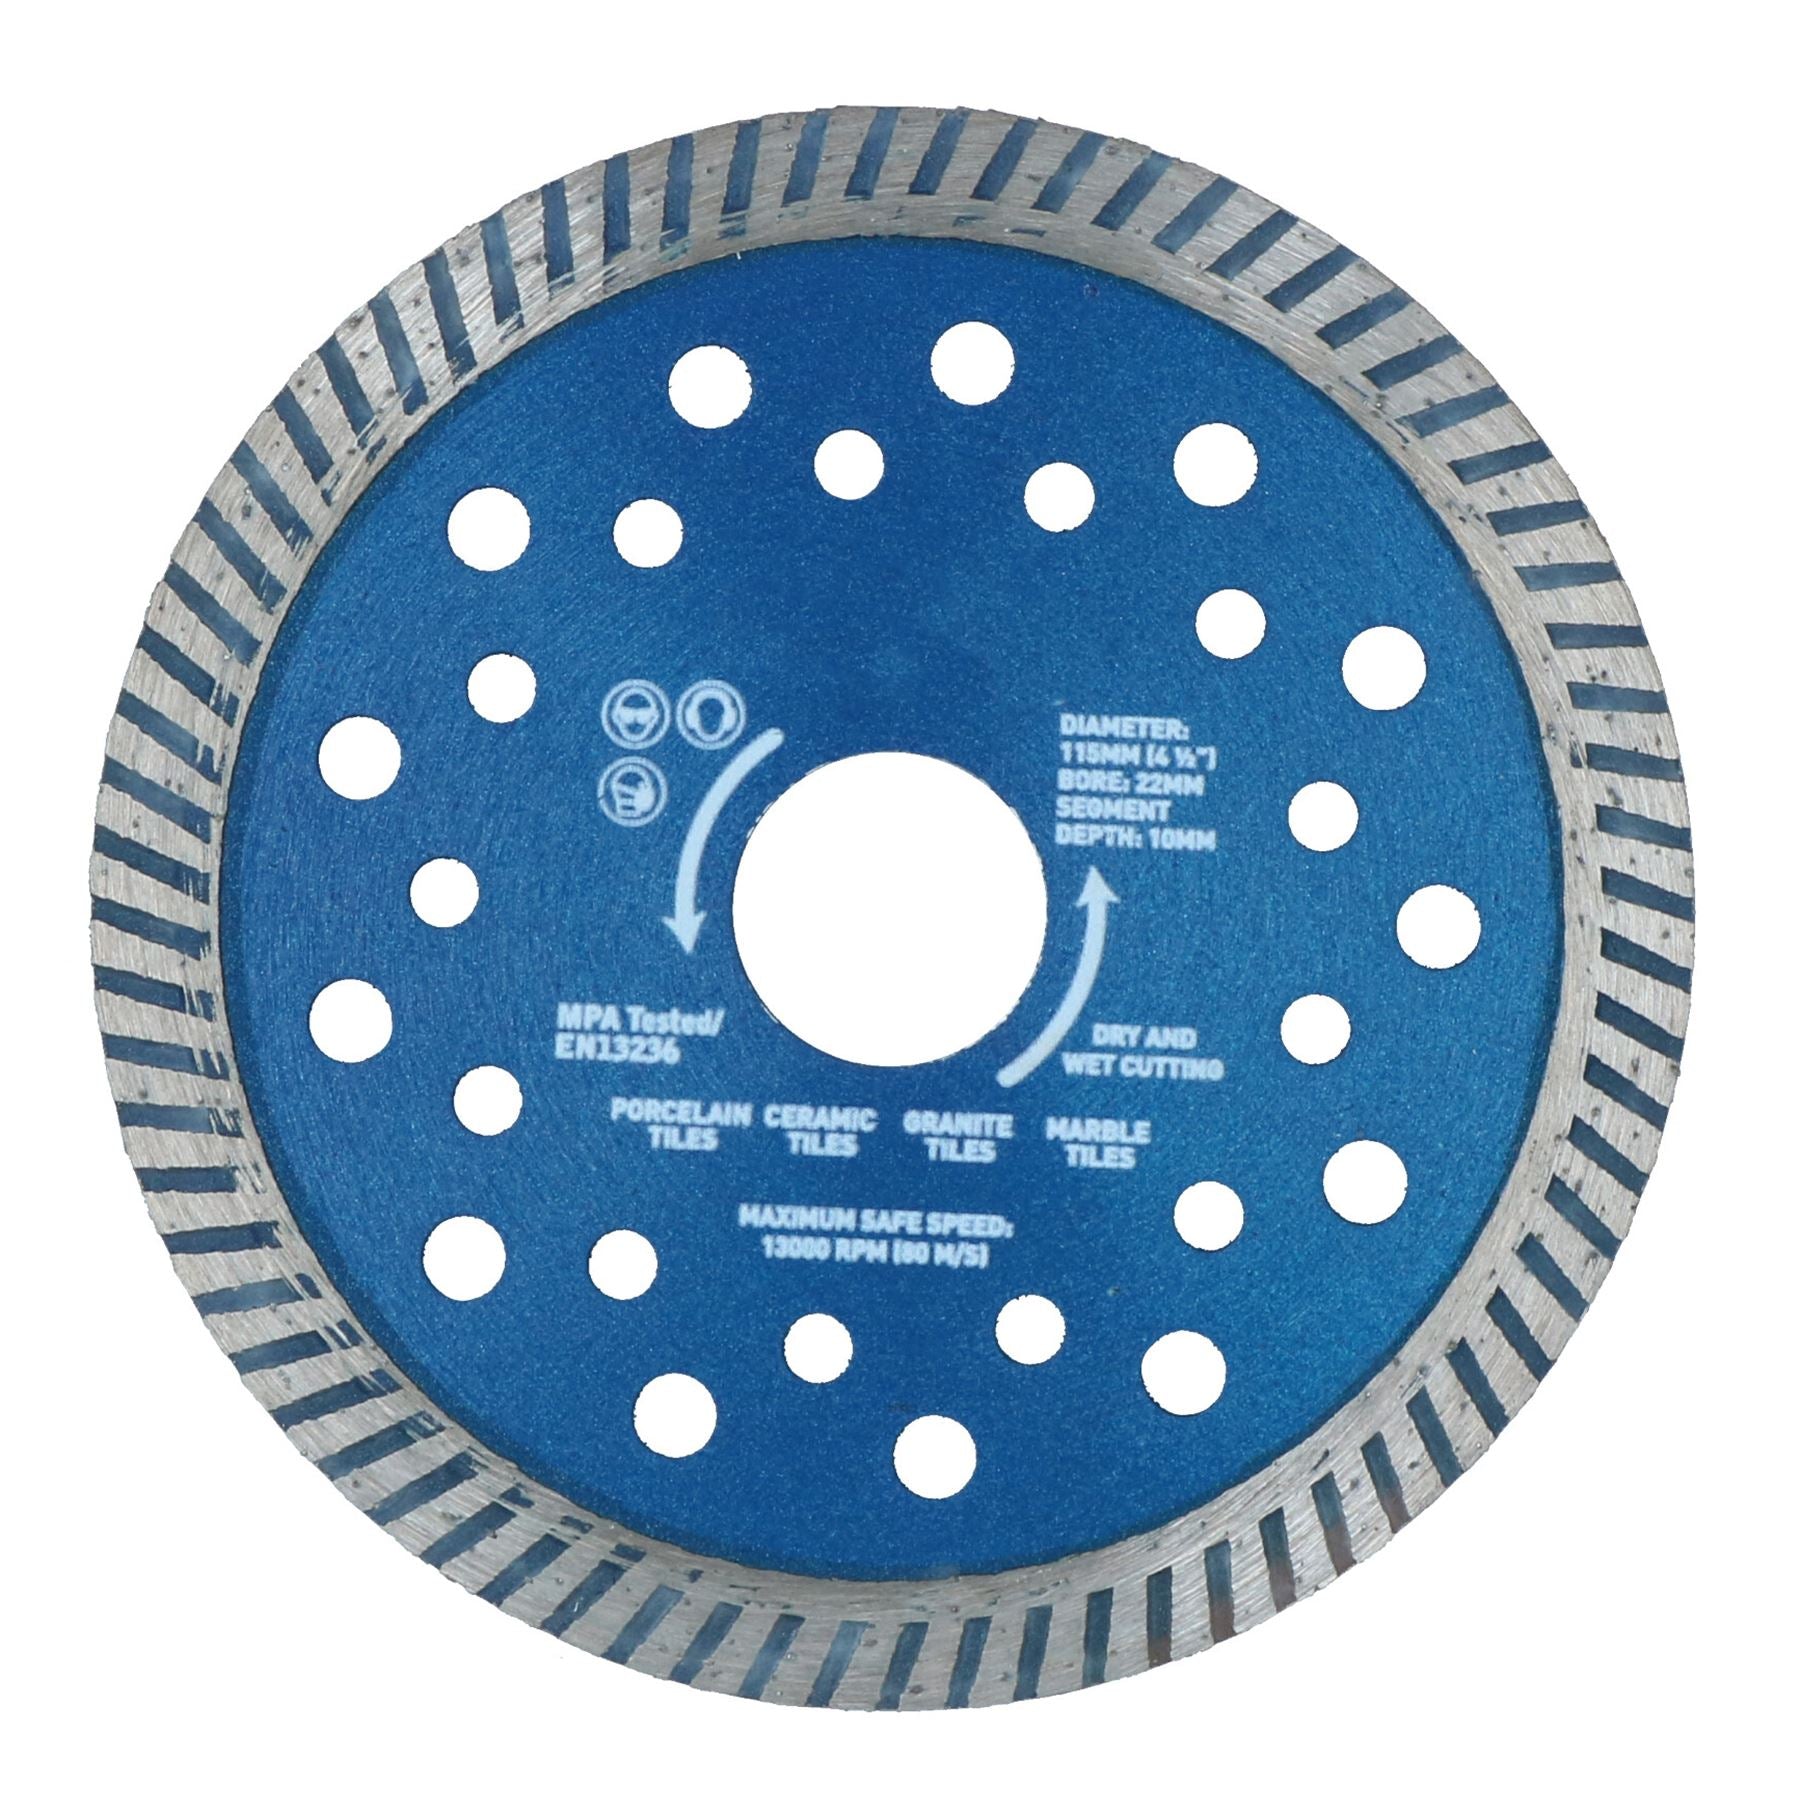 4-1/2in Dry and Wet Turbo Cutting Disc for Porcelain Ceramic Granite Marble